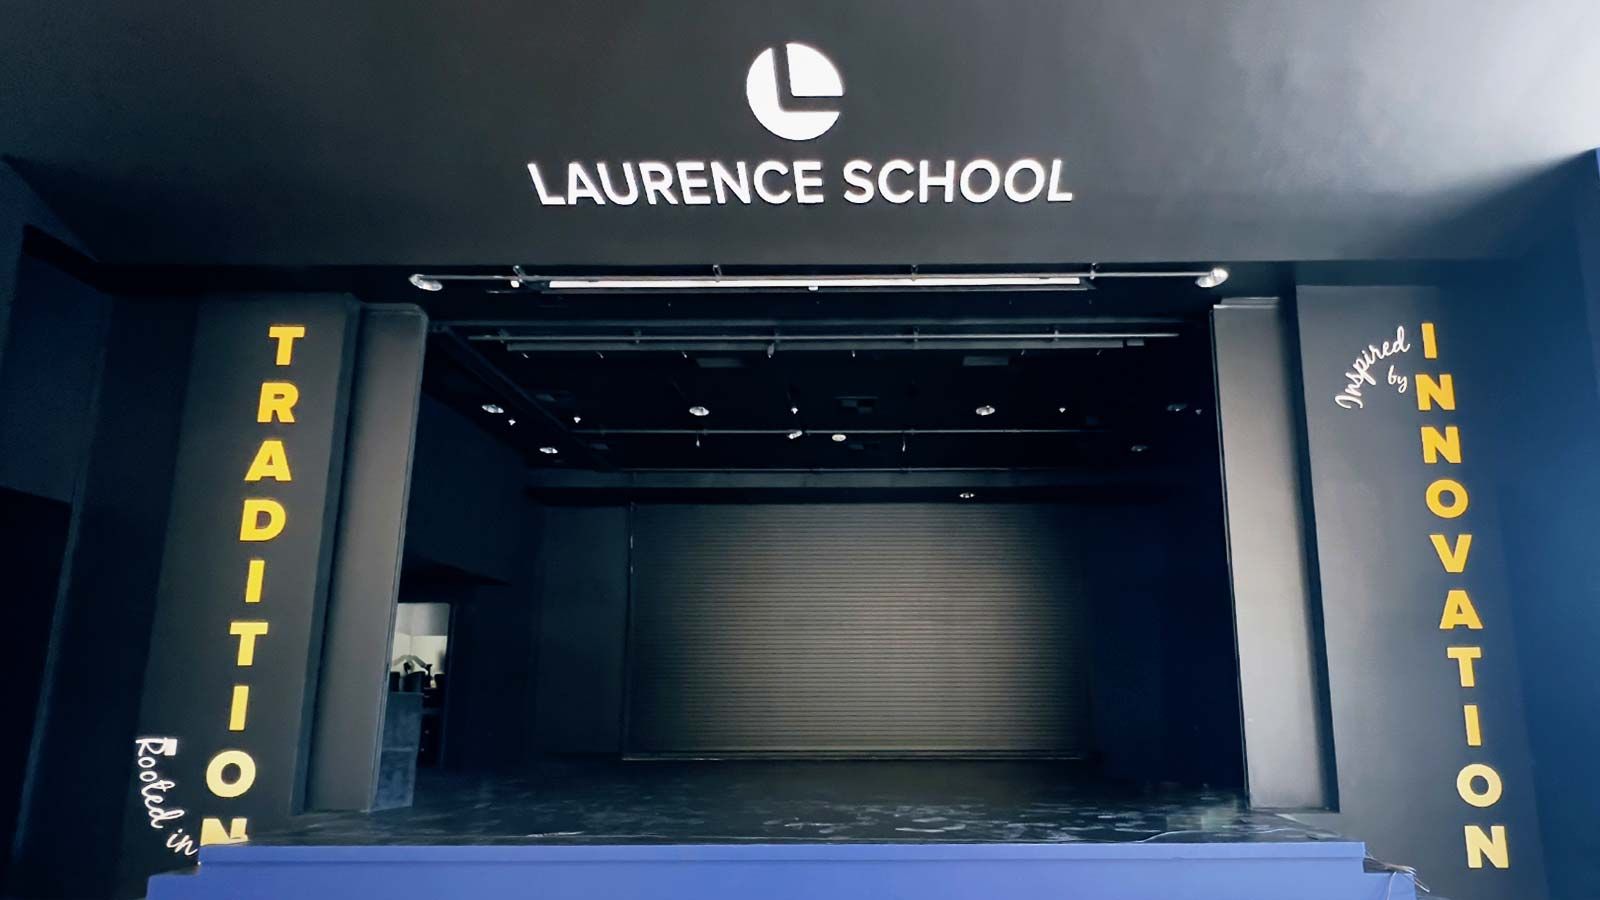 Laurence School college sign adhered to the interior wall